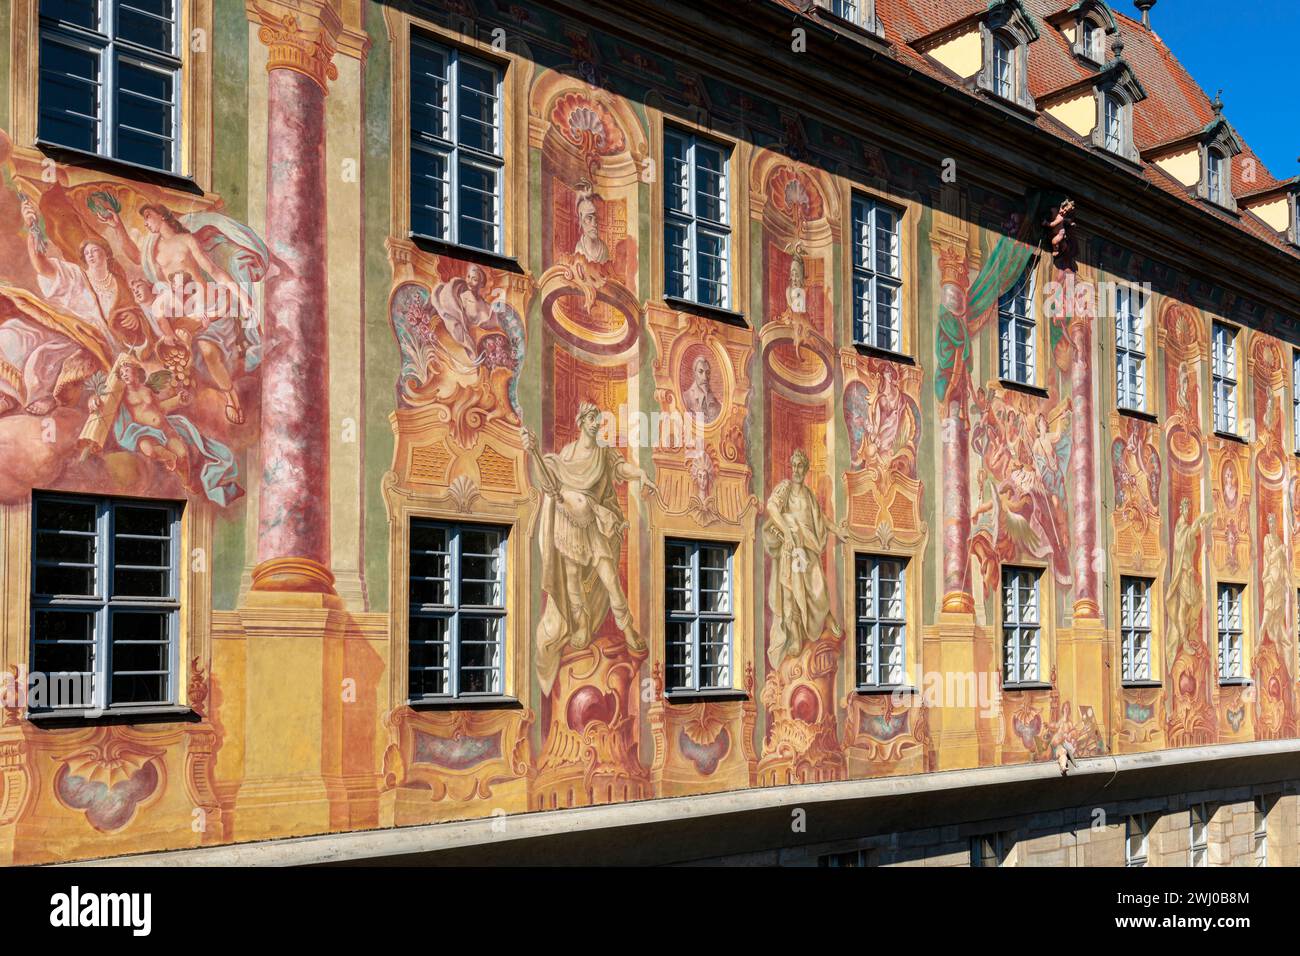 Old Town Hall Bamberg, faÃ§ade painting with figurative elements, East Side, Germania Foto Stock